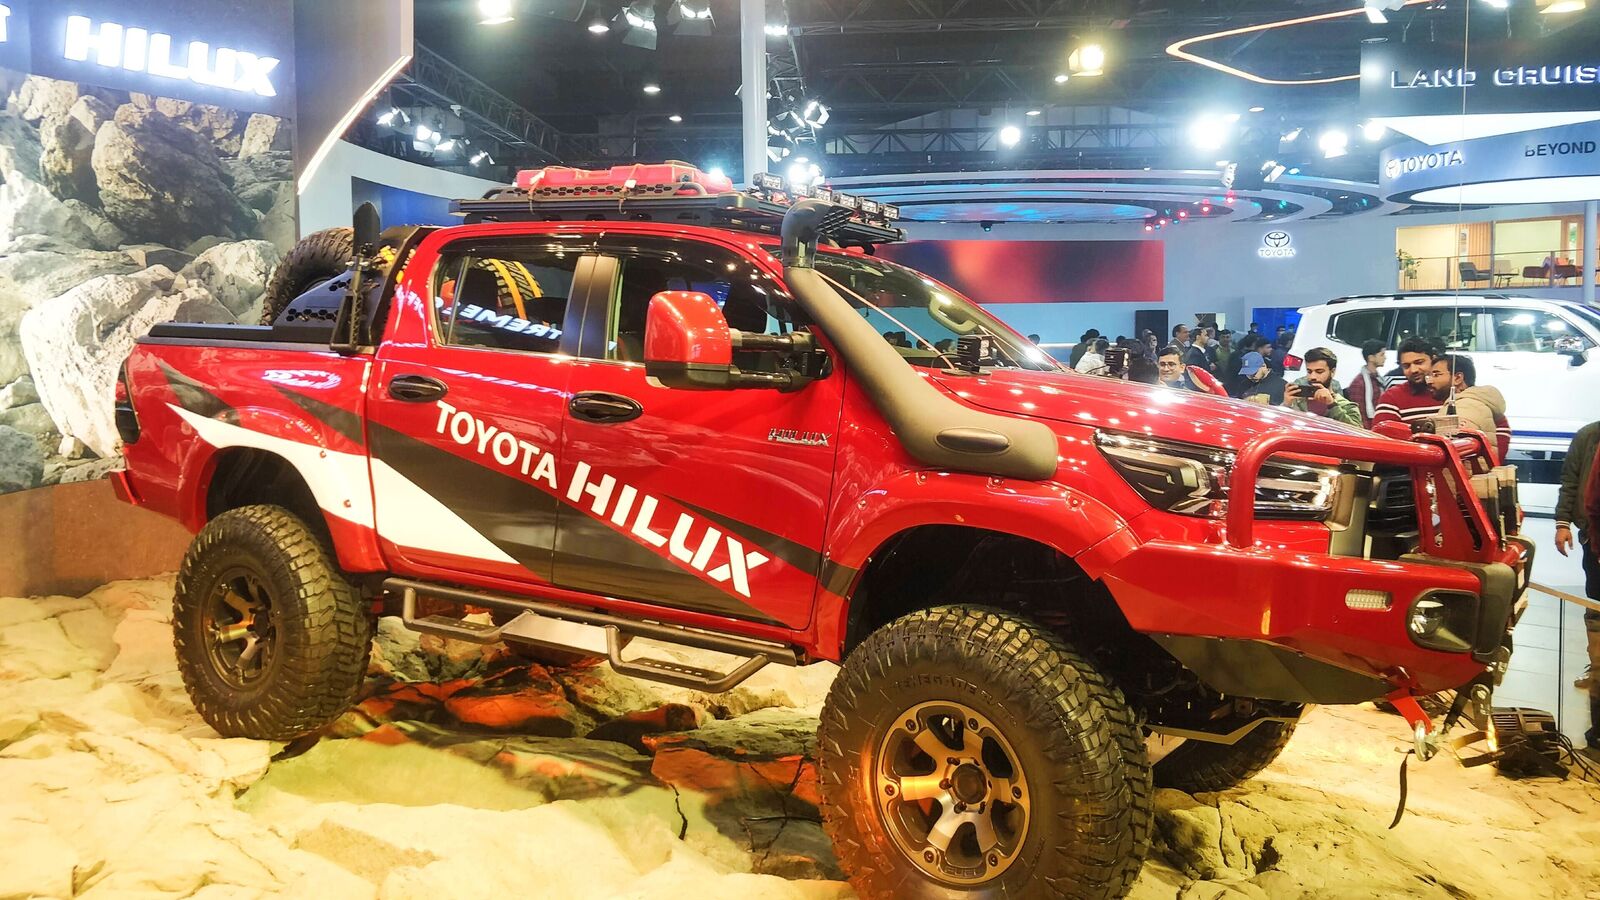 Auto Expo 2023: Toyota Hilux Extreme Off-Road concept showcased